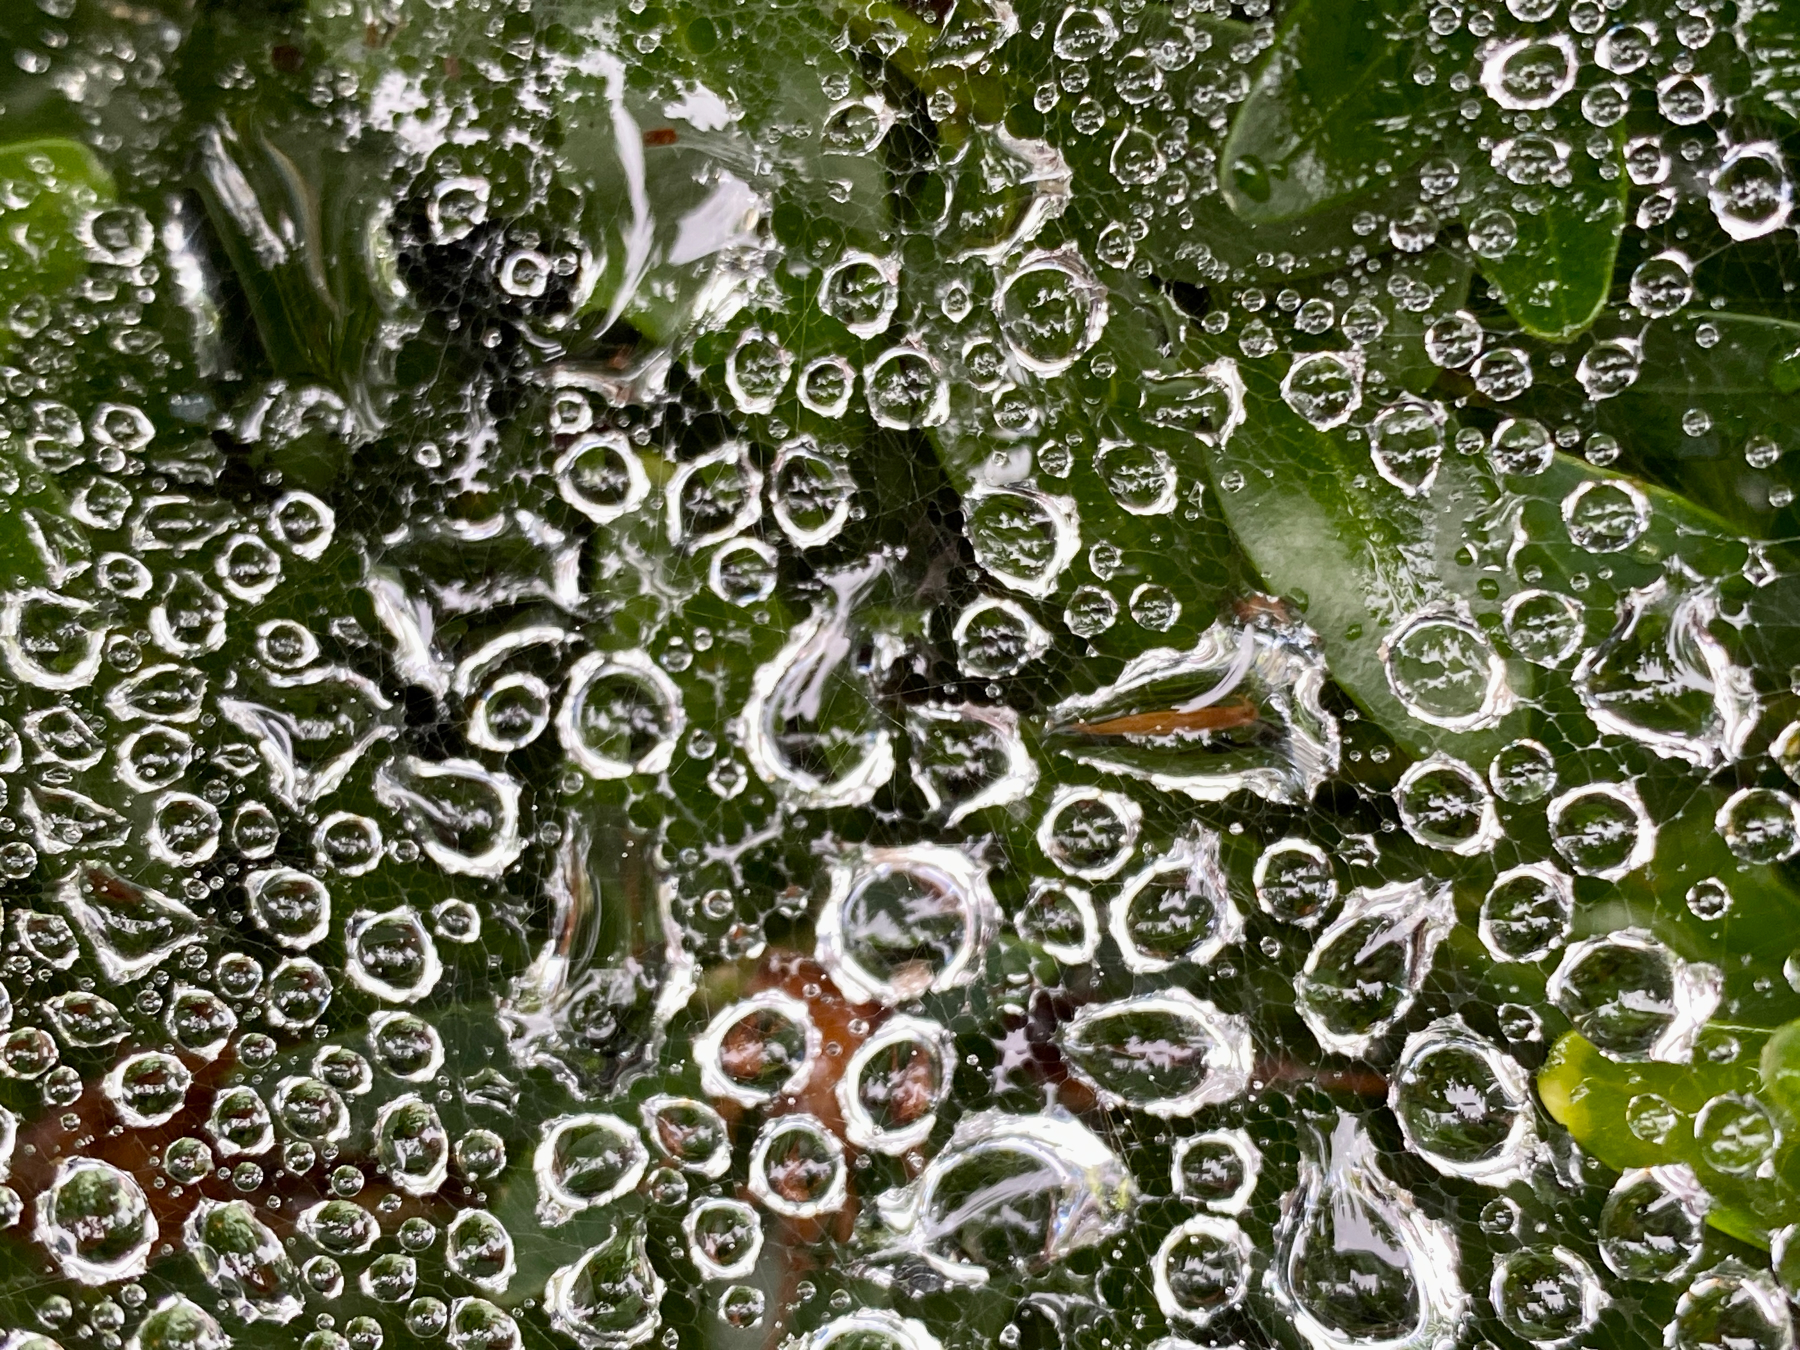 Macro image of irregularly shaped shining water droplets suspended on a spider web in front of barely visible foliage background